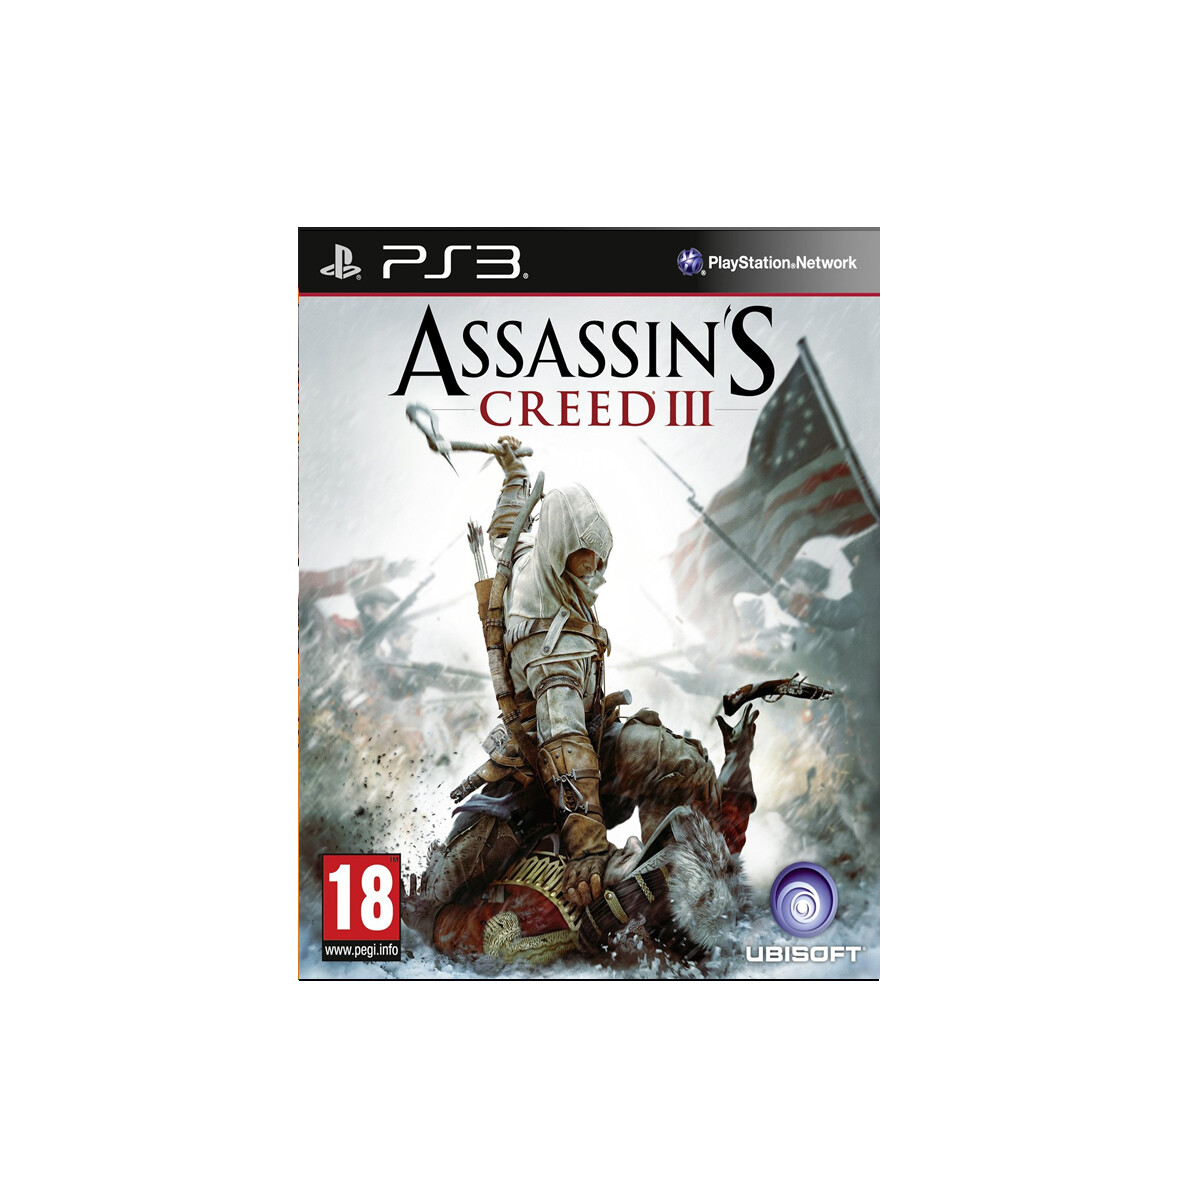 PS3 ASSASSIN'S CREED III 